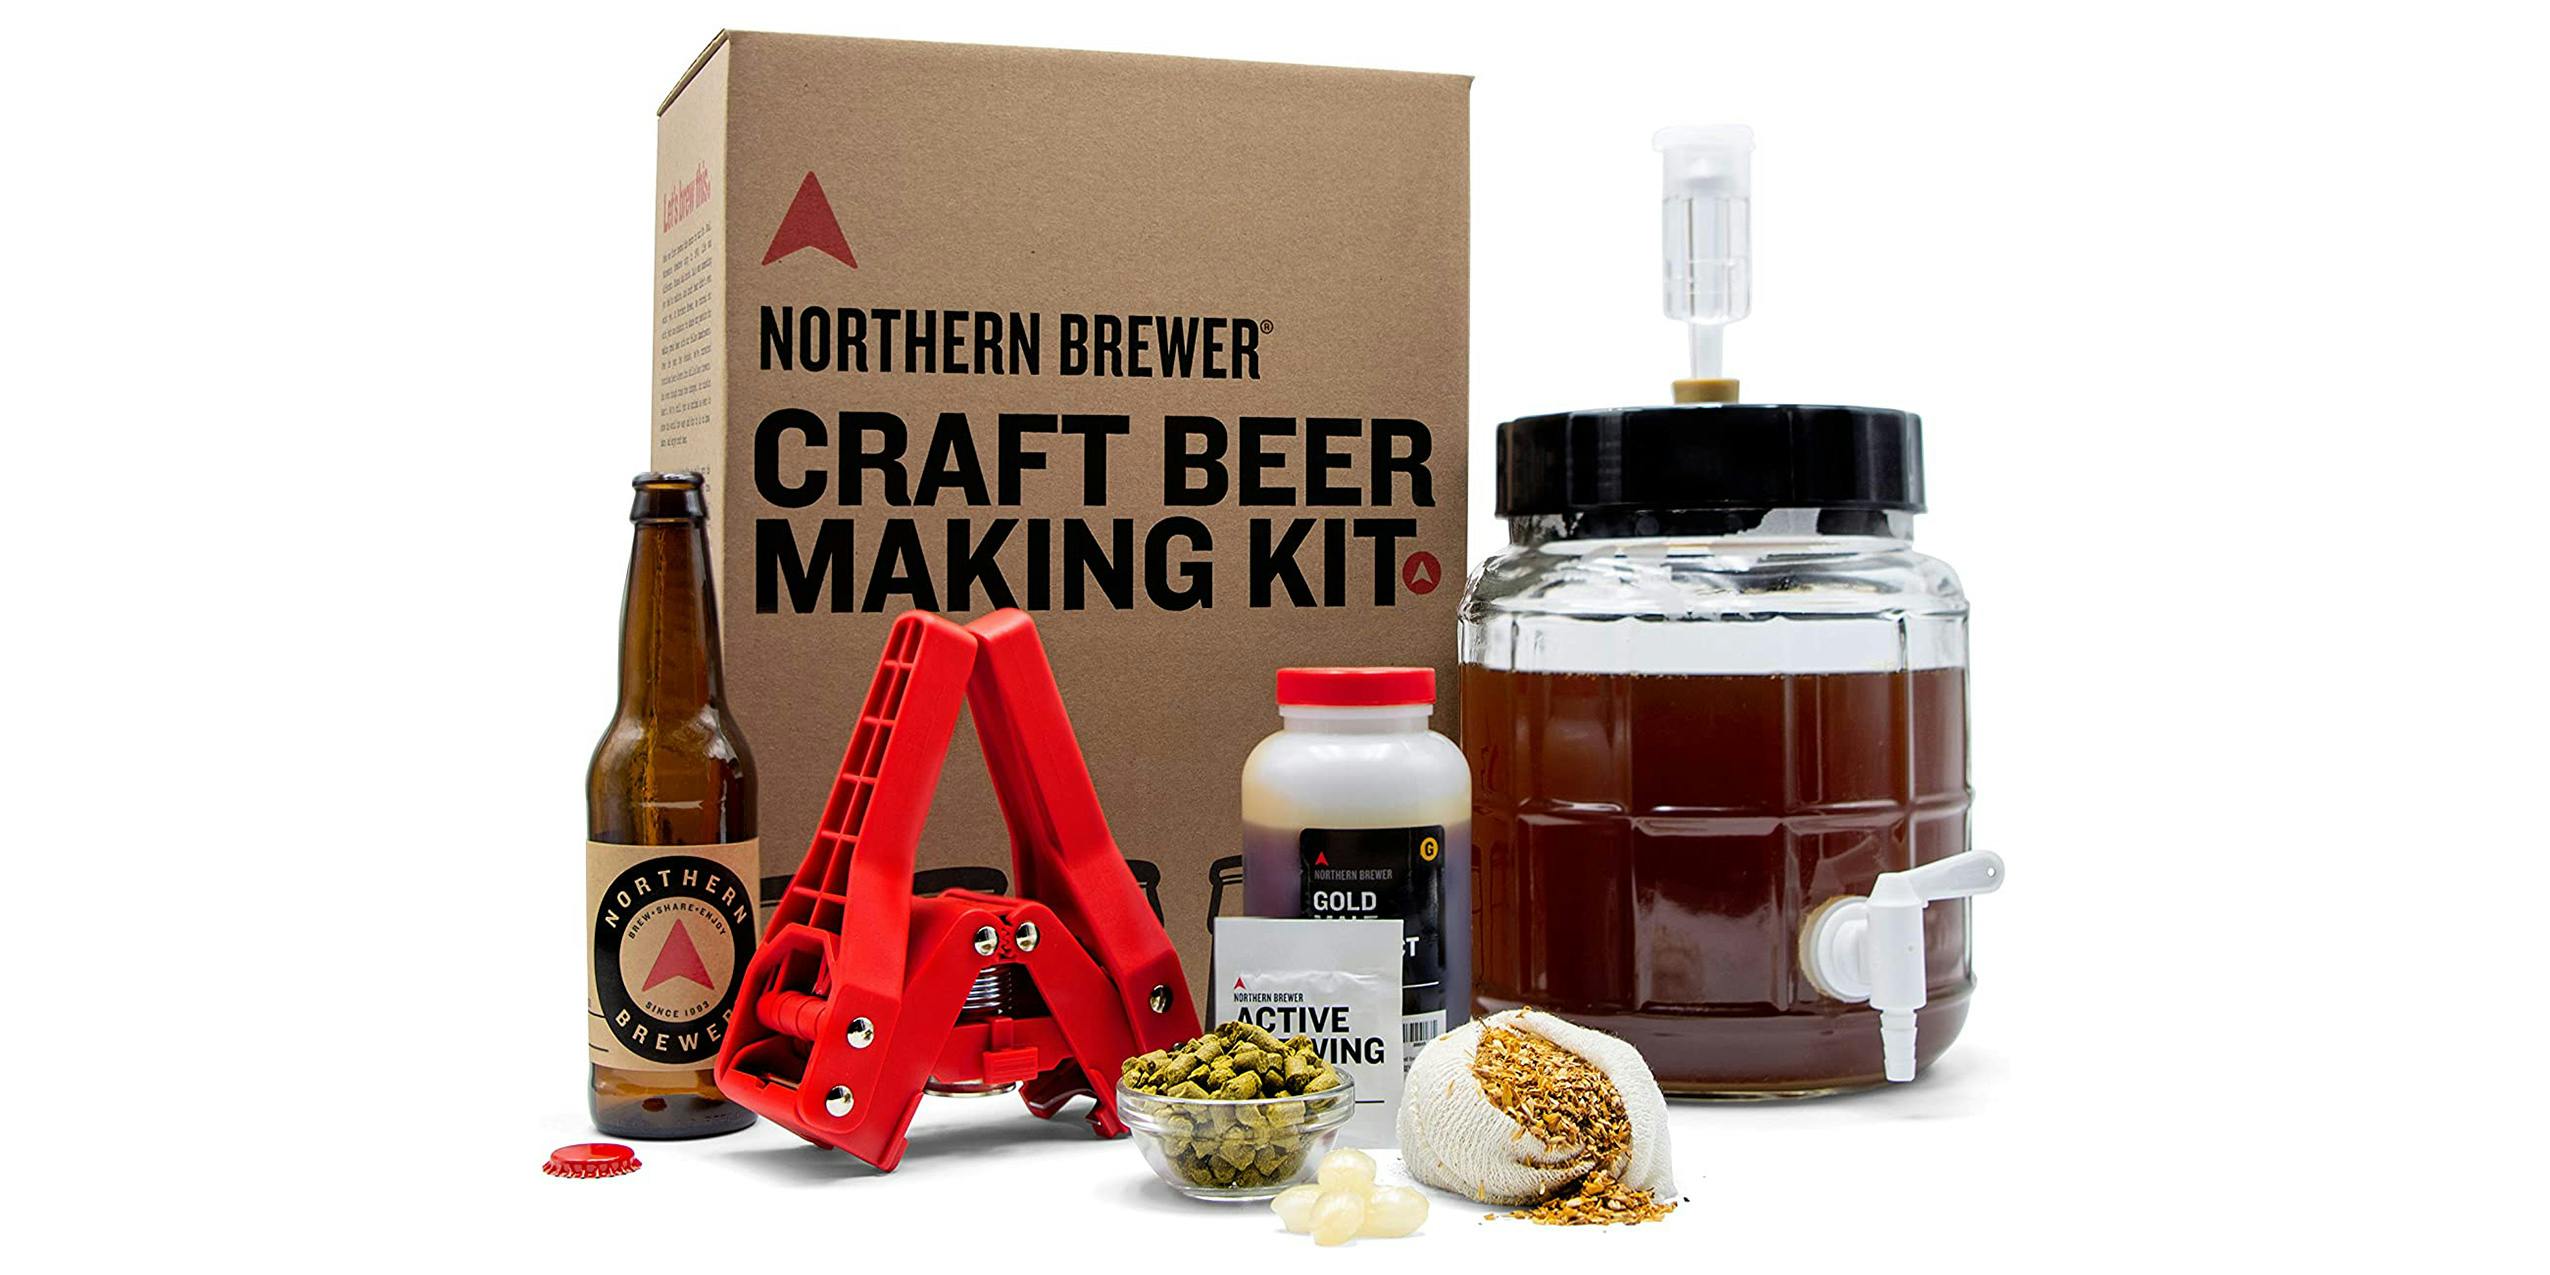 The contents of the Northern Brewer Beer Kit complete with bottler, brewing bucket, and ingredients for a batch of beer.